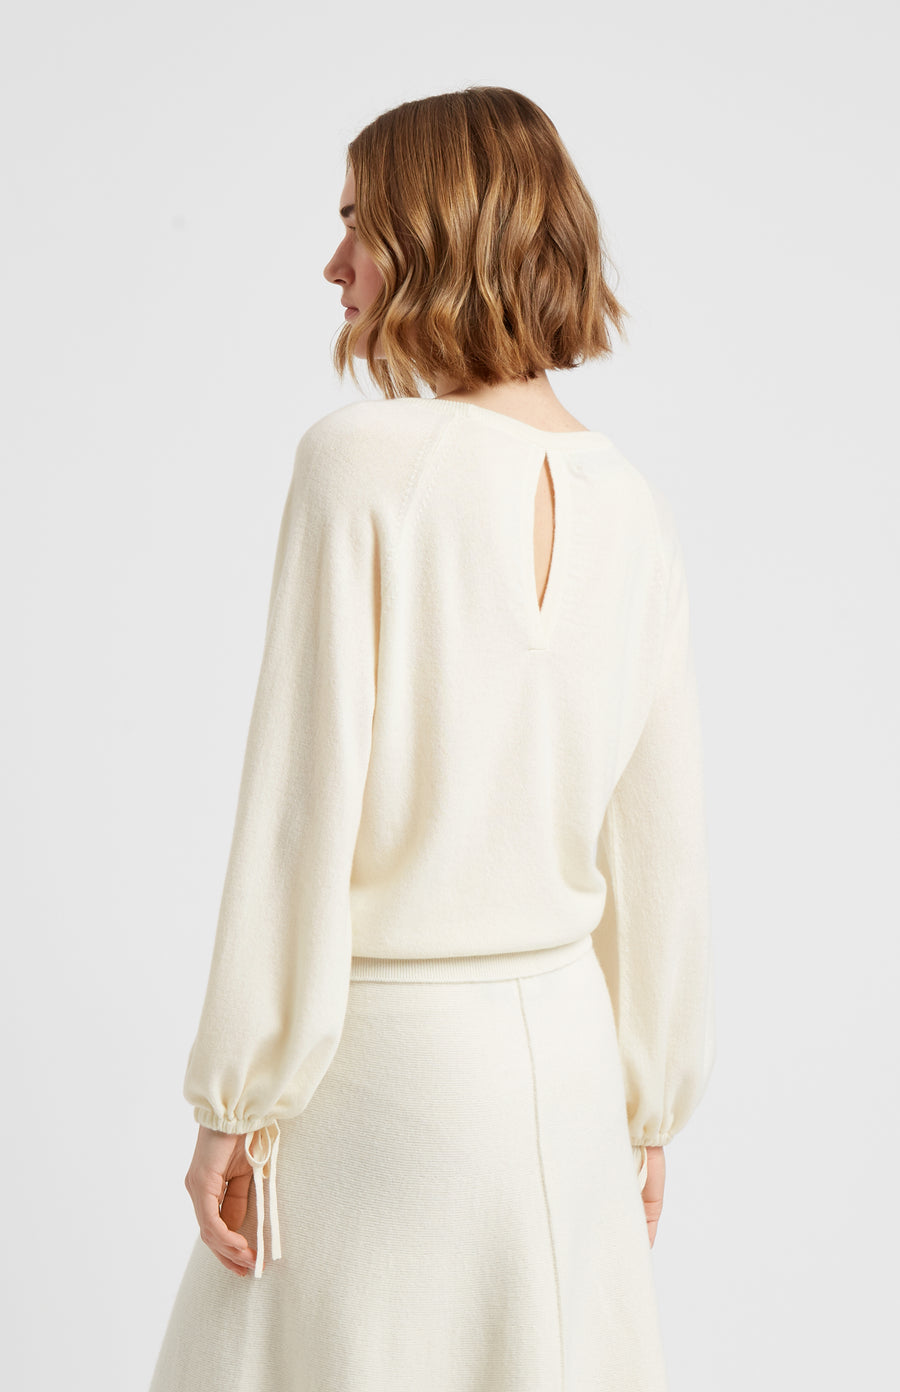 Pringle of Scotland Lightweight Round Neck Cashmere Jumper in Off White rear view